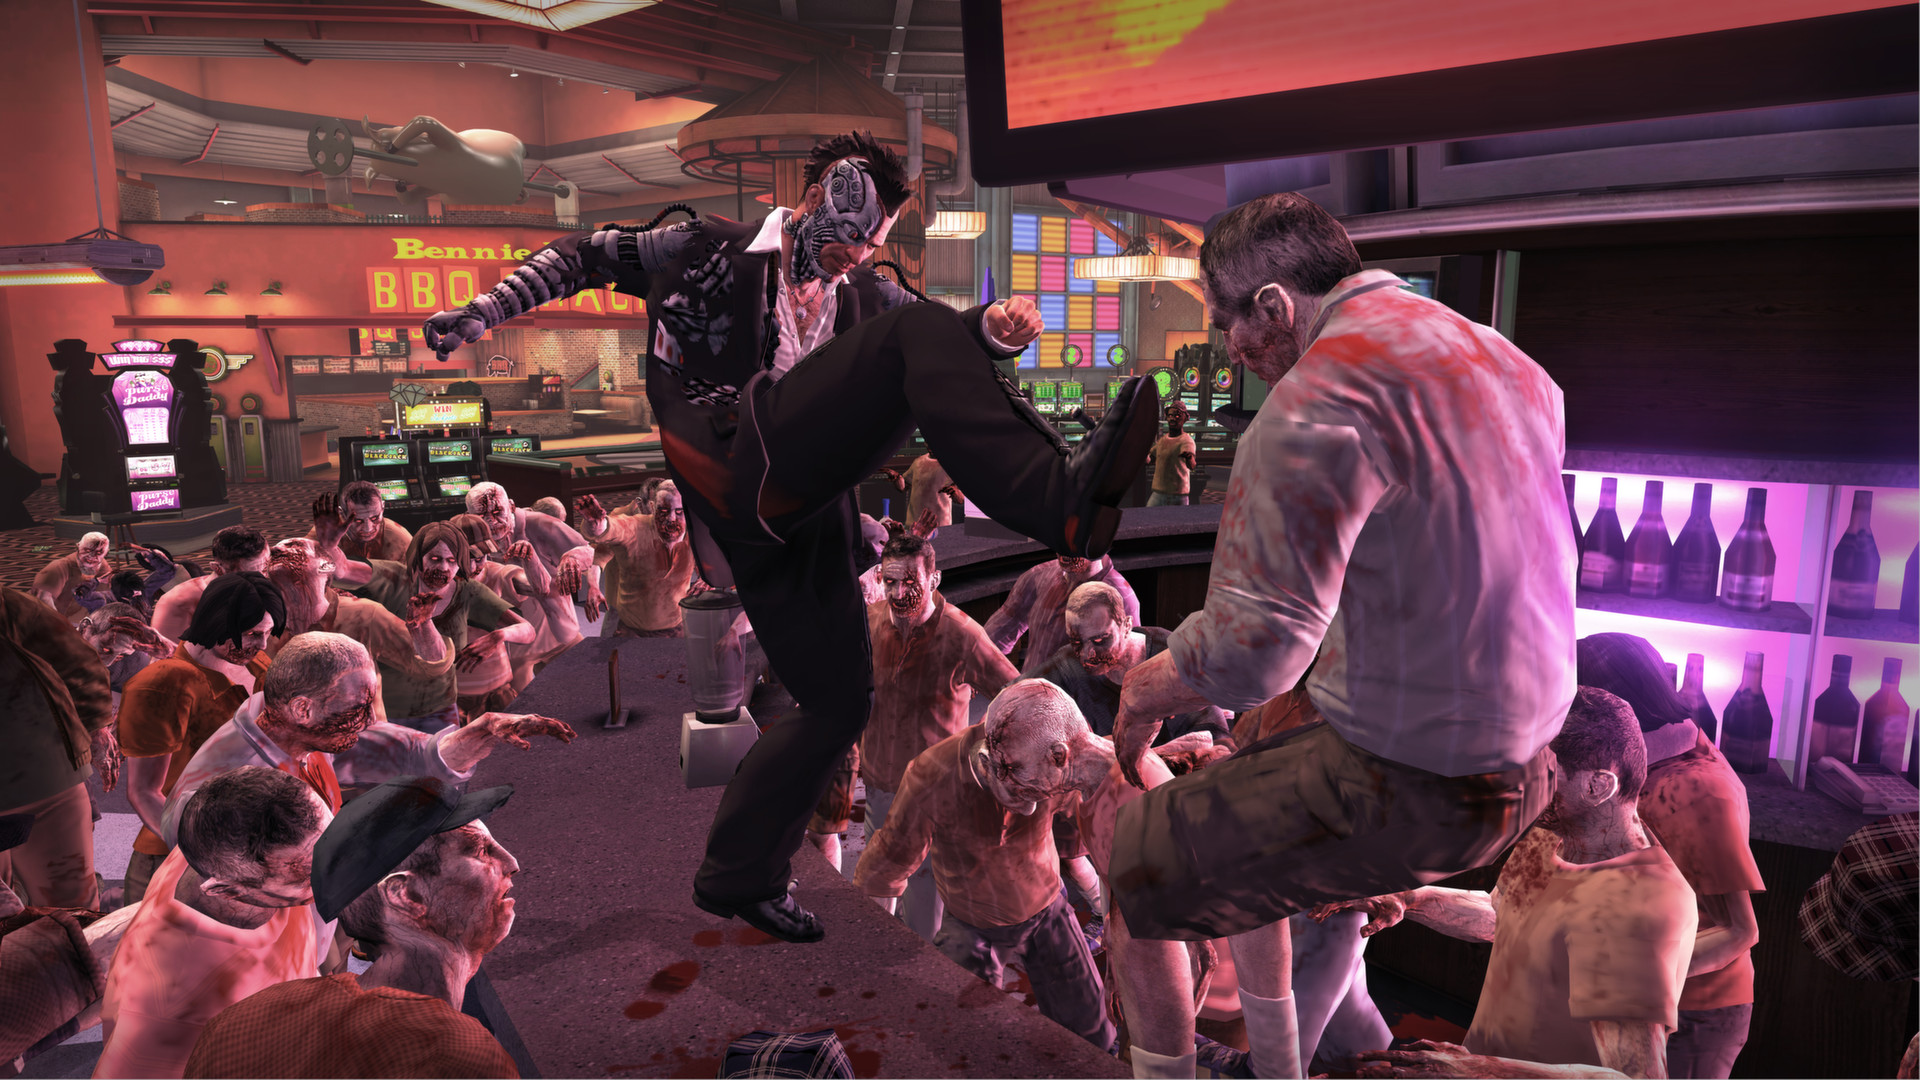 Dead Rising 2: Off the Record (Video Game 2011) - IMDb